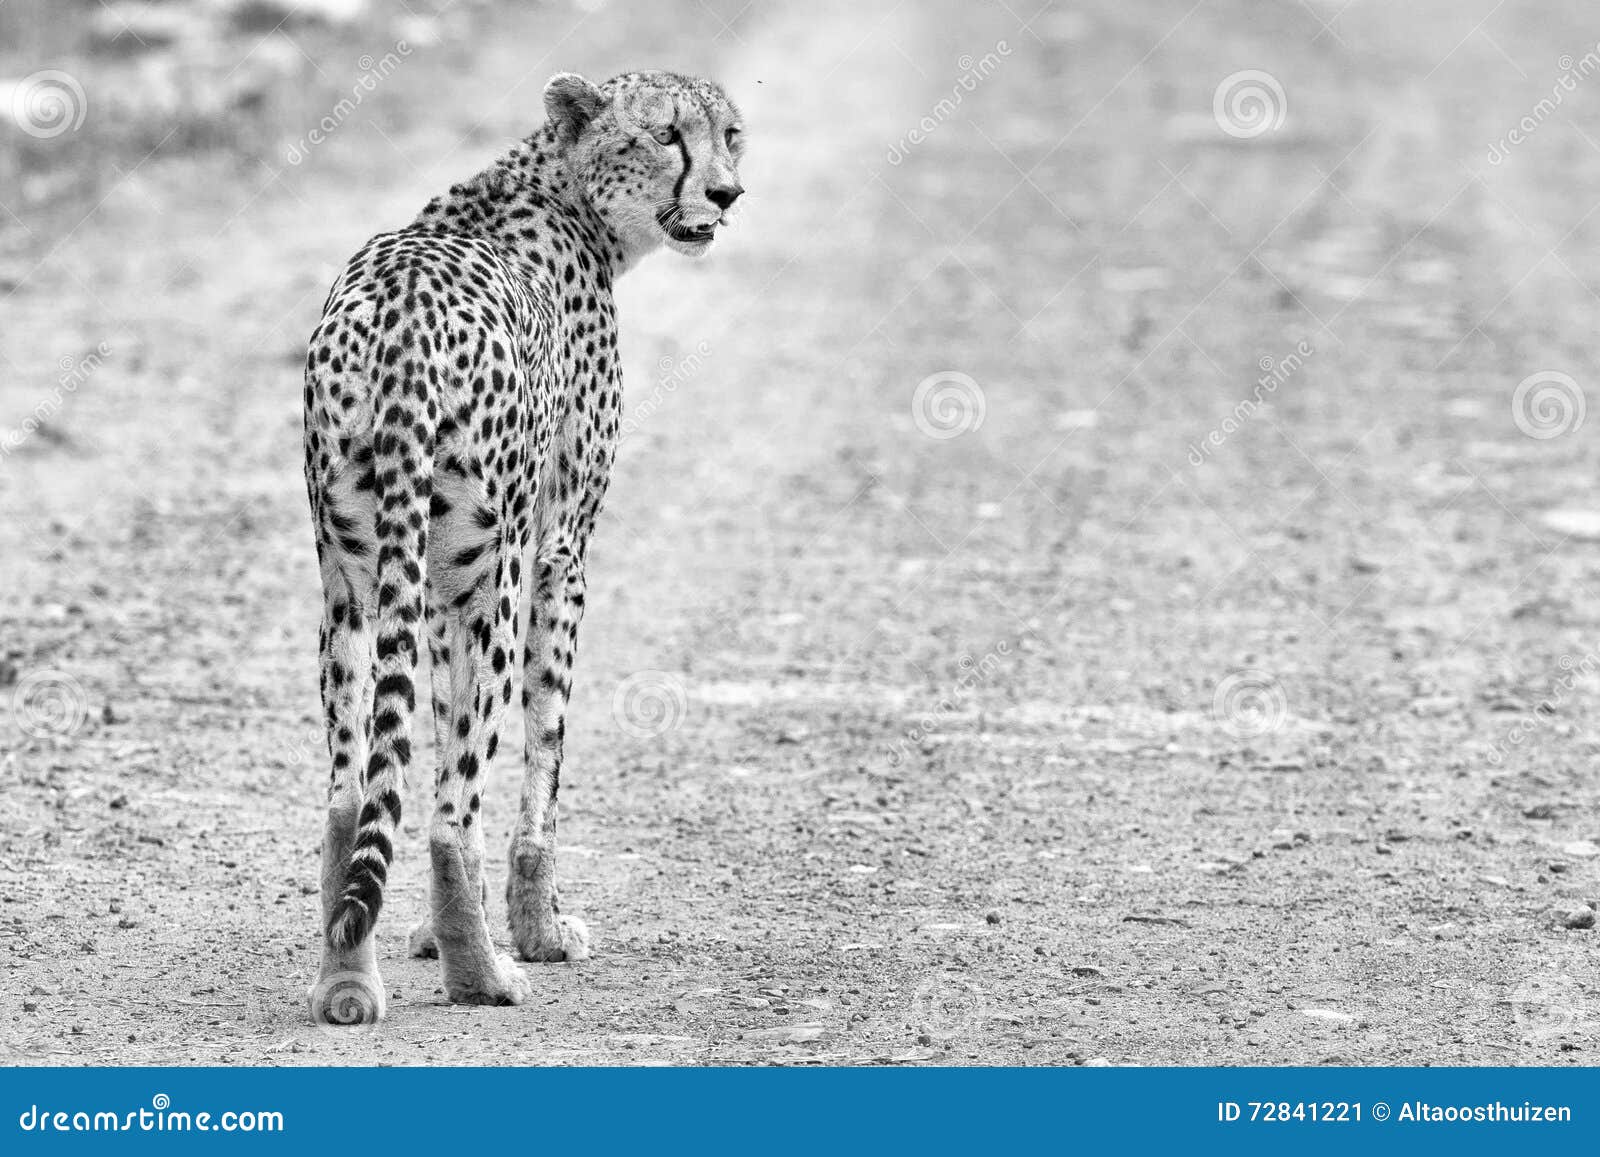 Lone Cheetah Walking Across a Road at Dusk Looking for Prey Stock Image ...